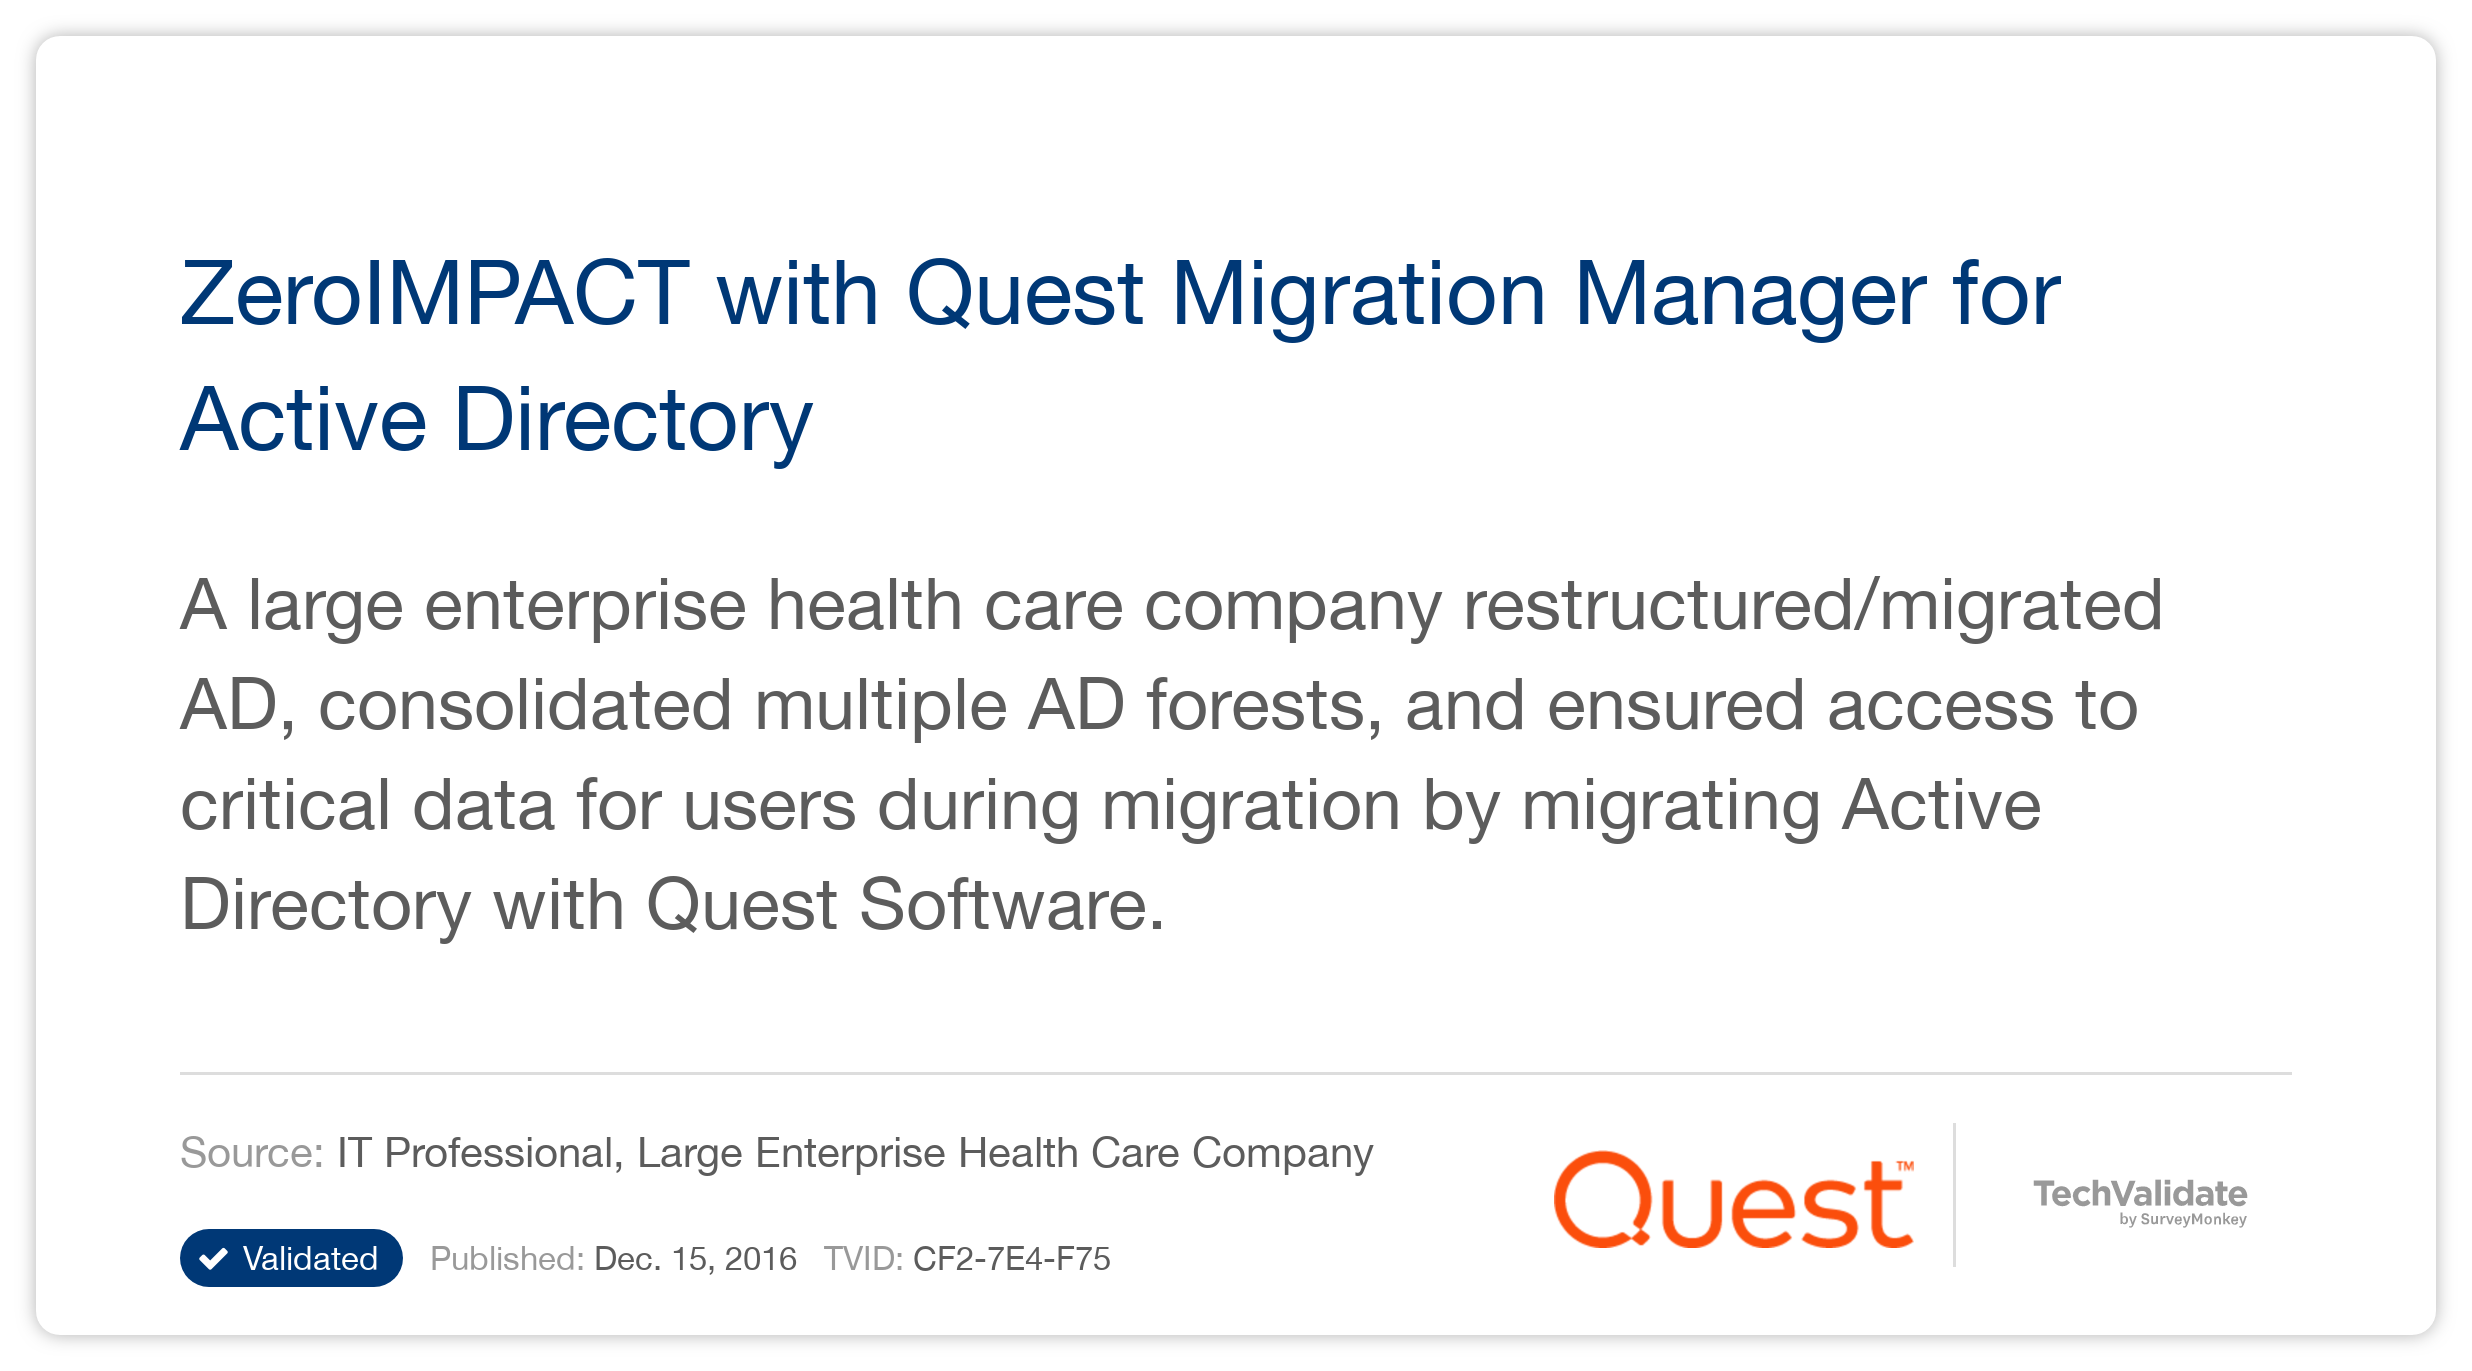 ZeroIMPACT with Quest Migration Manager for Active Directory